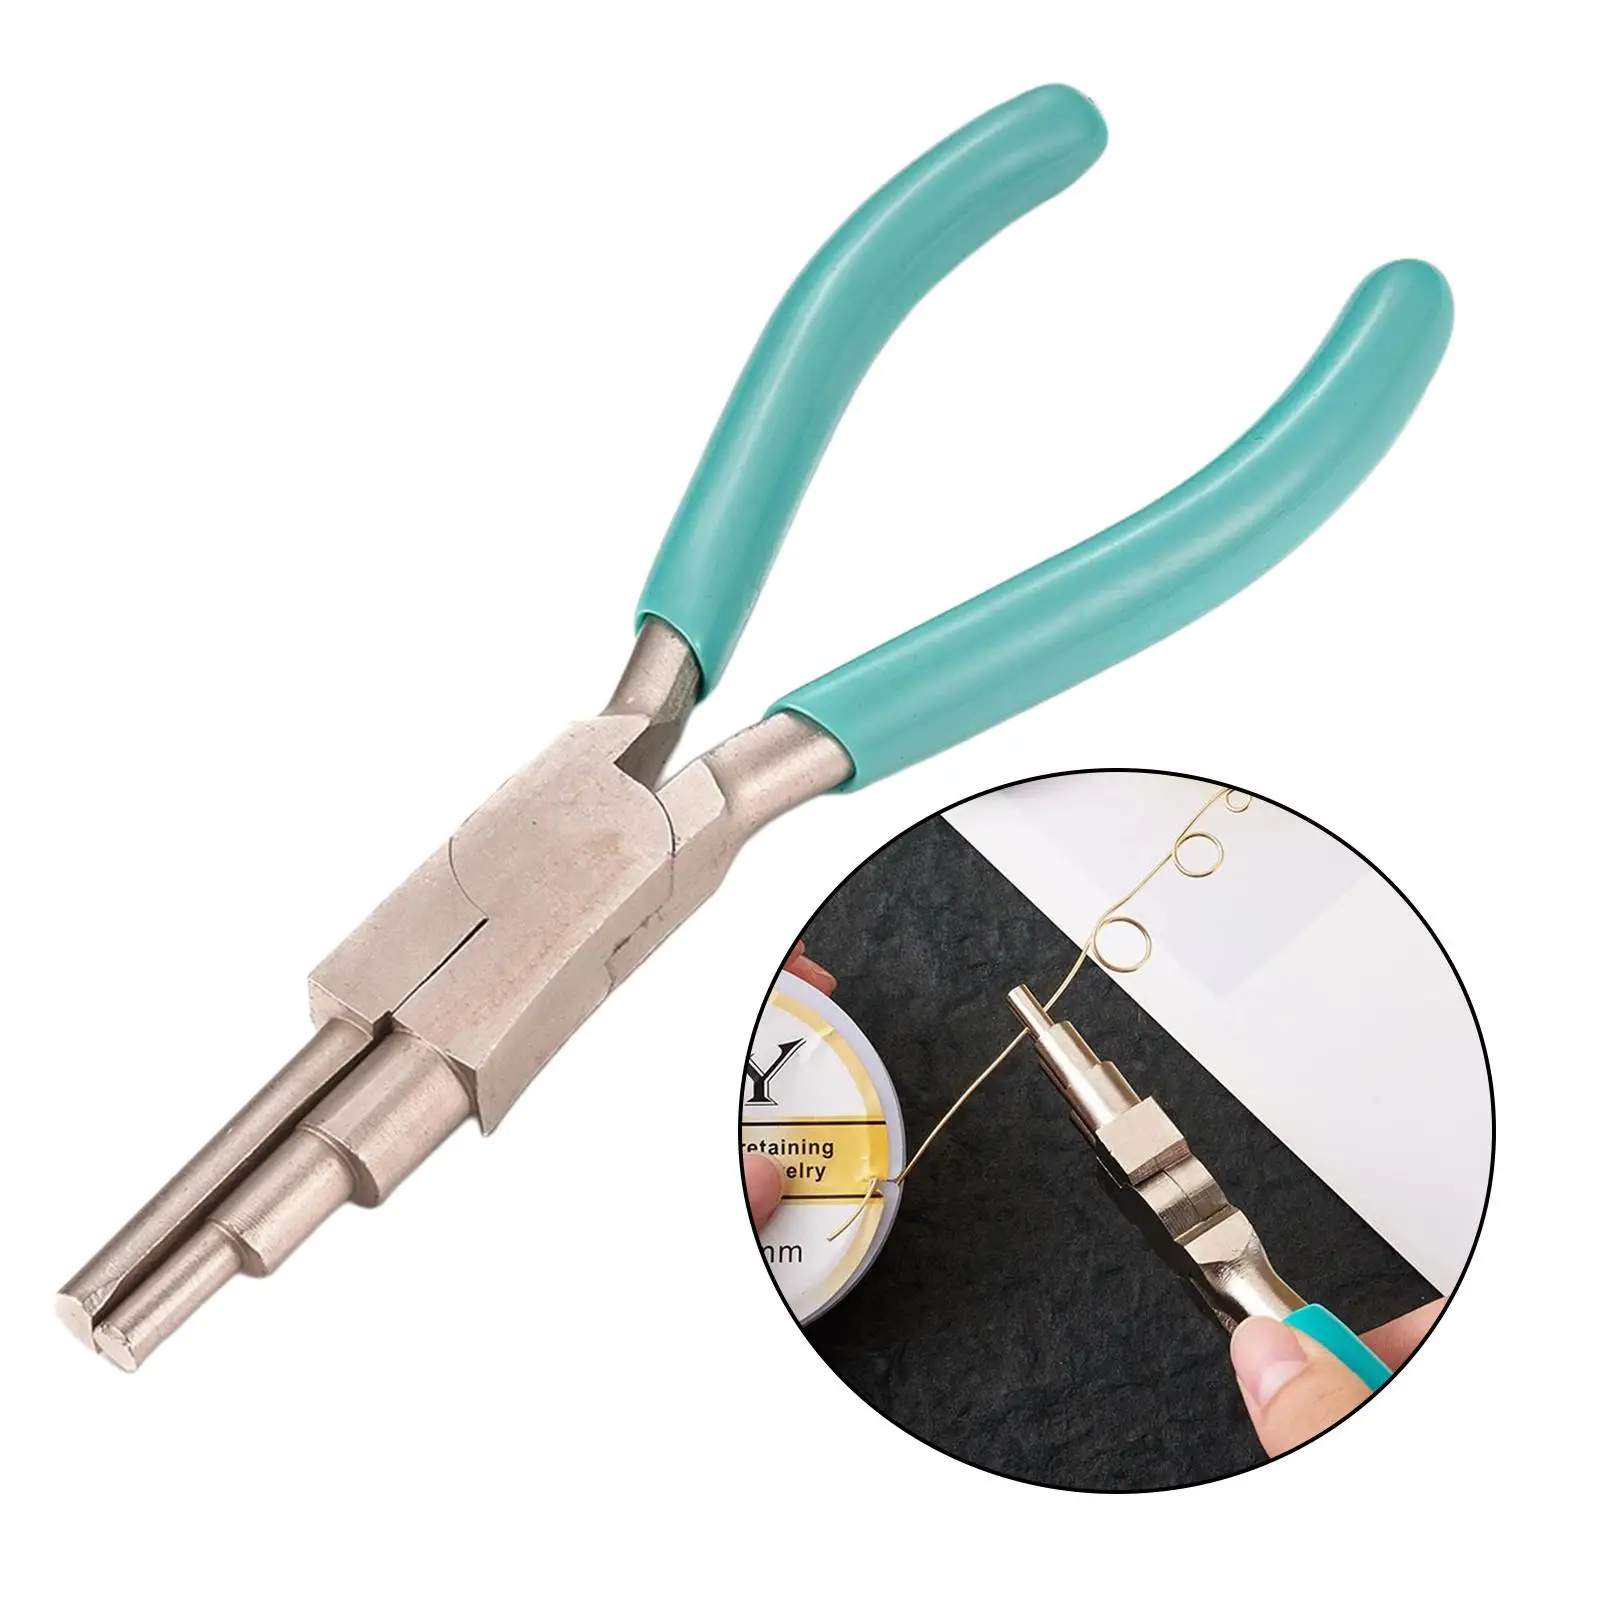 Thread Bending Pliers Comfortable Non for Looping The Thread